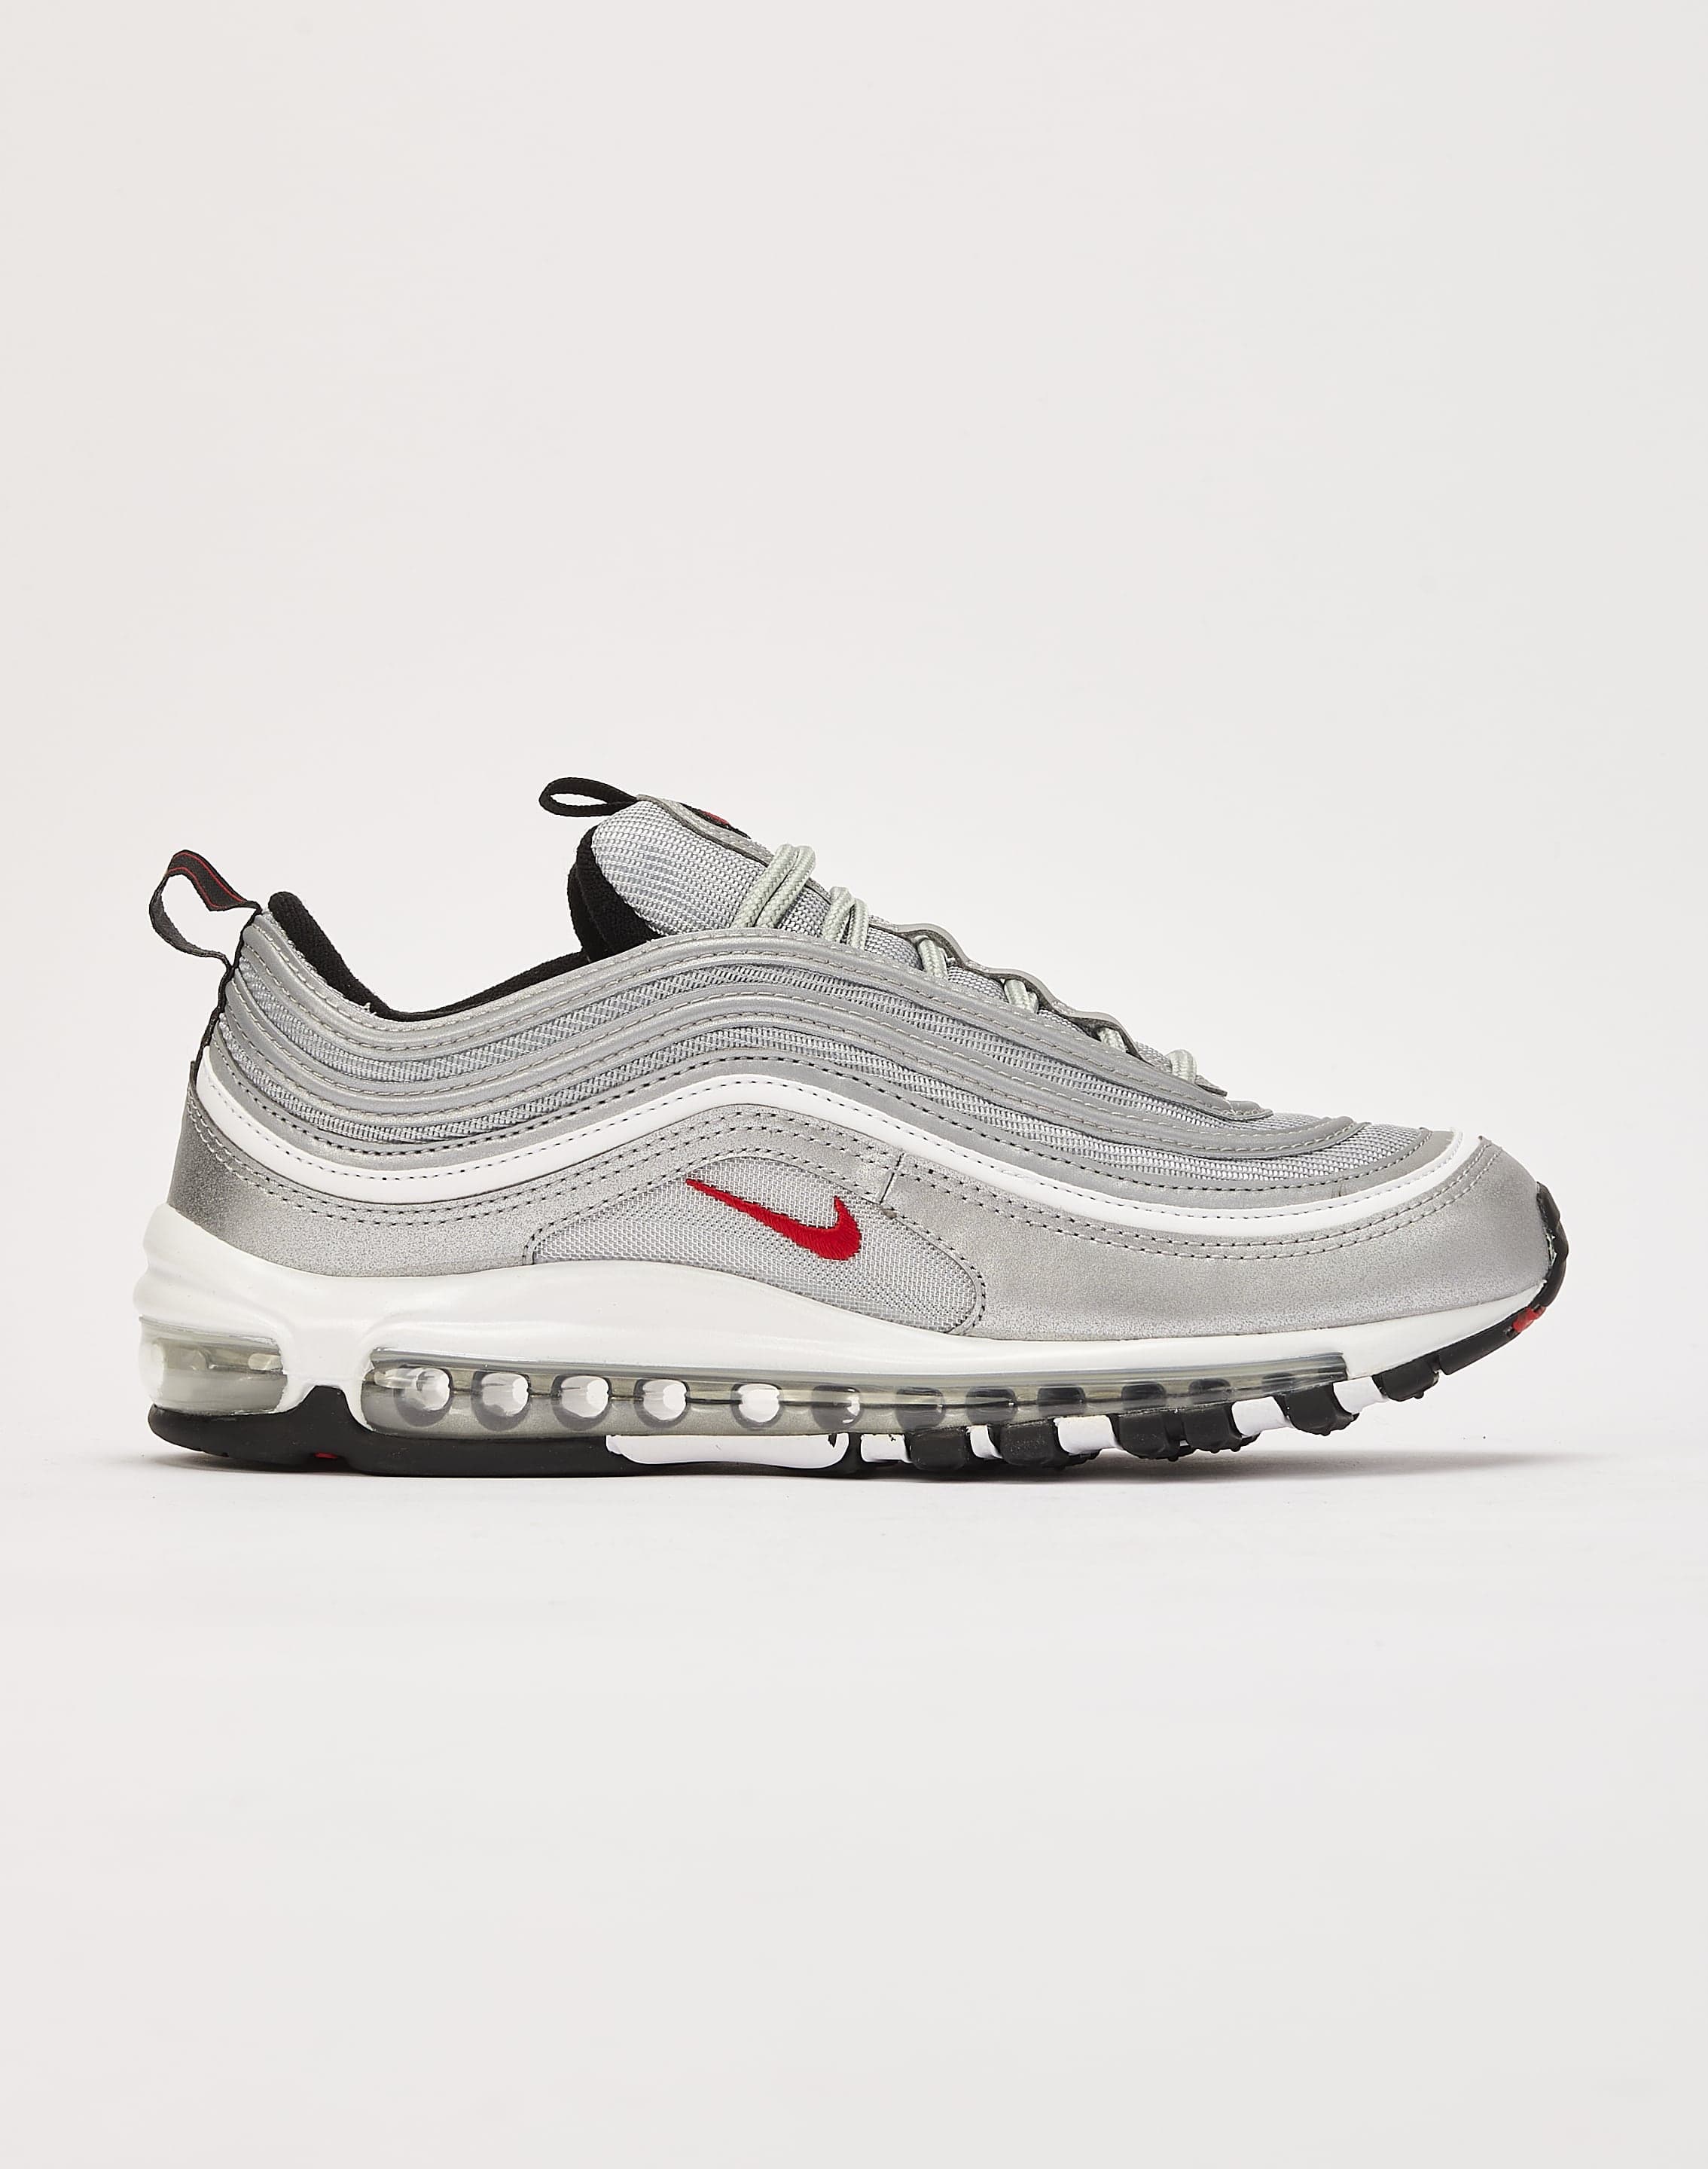 Nike Men's Air Max 97 White Bullet Casual Shoes